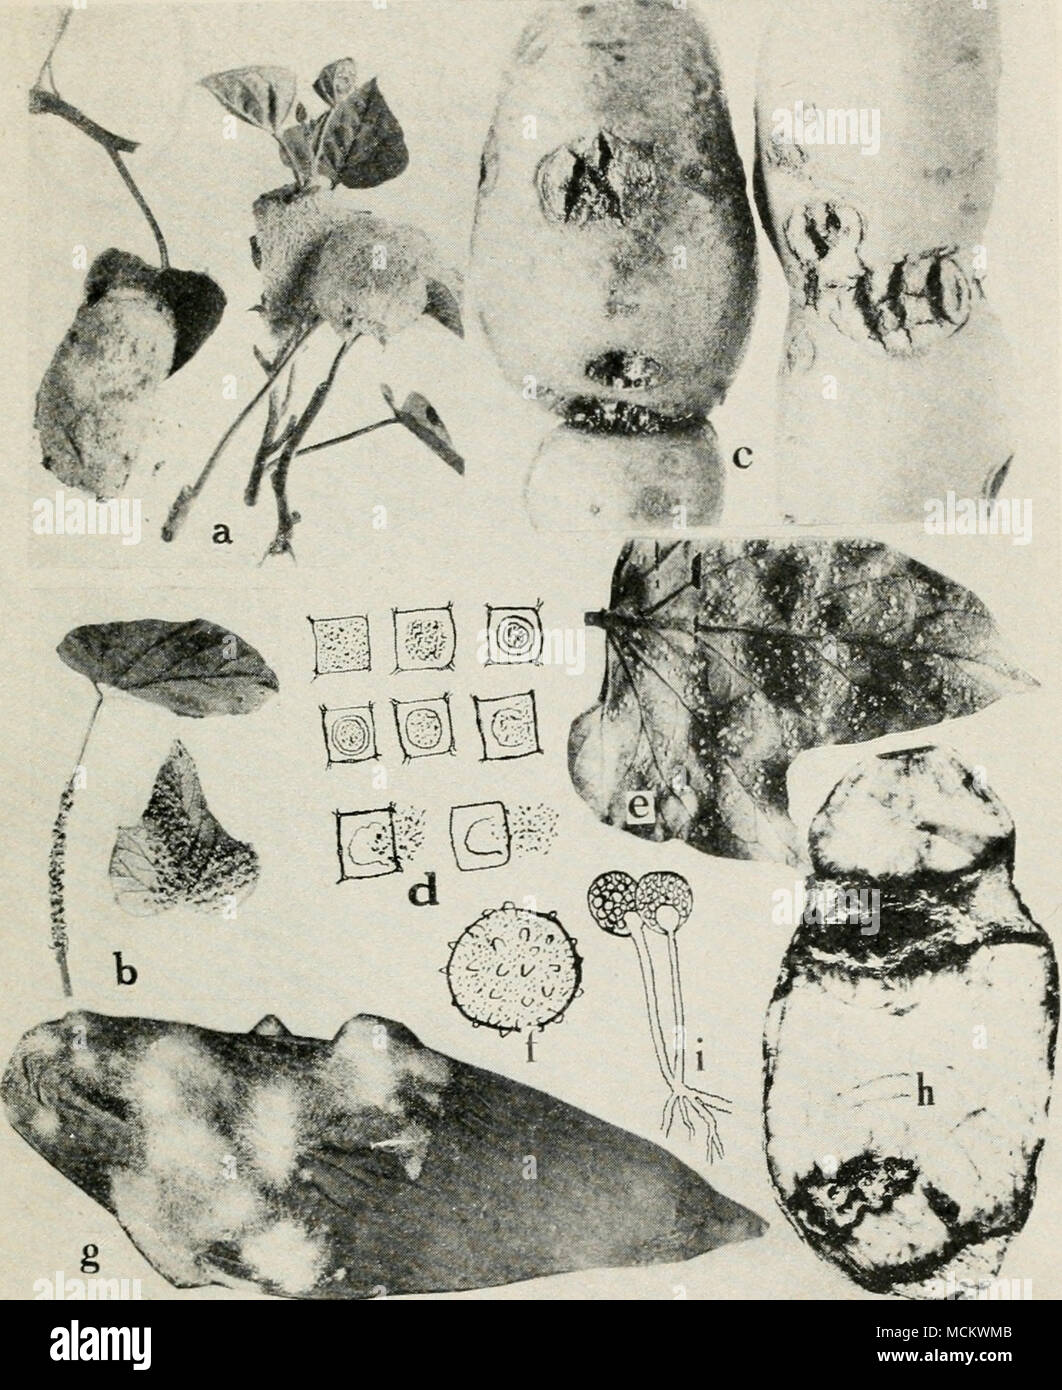 . Fig. 25. Sweet Potato Diseases. a. Slime mold {Fuligo violacea), b. slime mold (Physarum plumbeum), c. pox or pit, d. formation of a cyst and liberation of spores of Cyslospnra halala (after Elliot), e. white rust, /. oospore of the white rust fungus, g. soft rot, h. ring rot, i. fruiting stalks of Rhizopus nigricans. Stock Photo